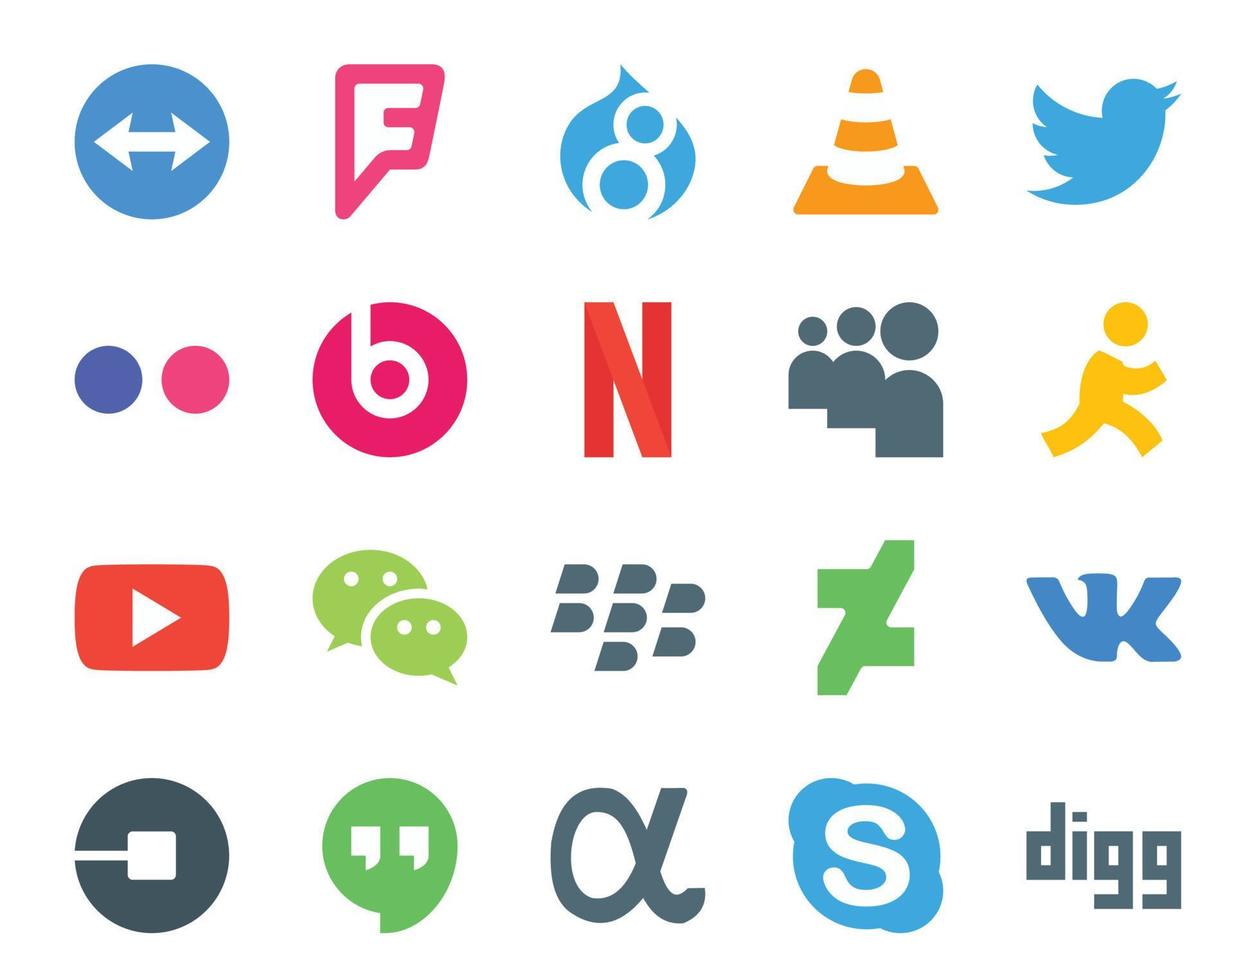 20 Social Media Icon Pack Including blackberry wechat flickr video aim vector